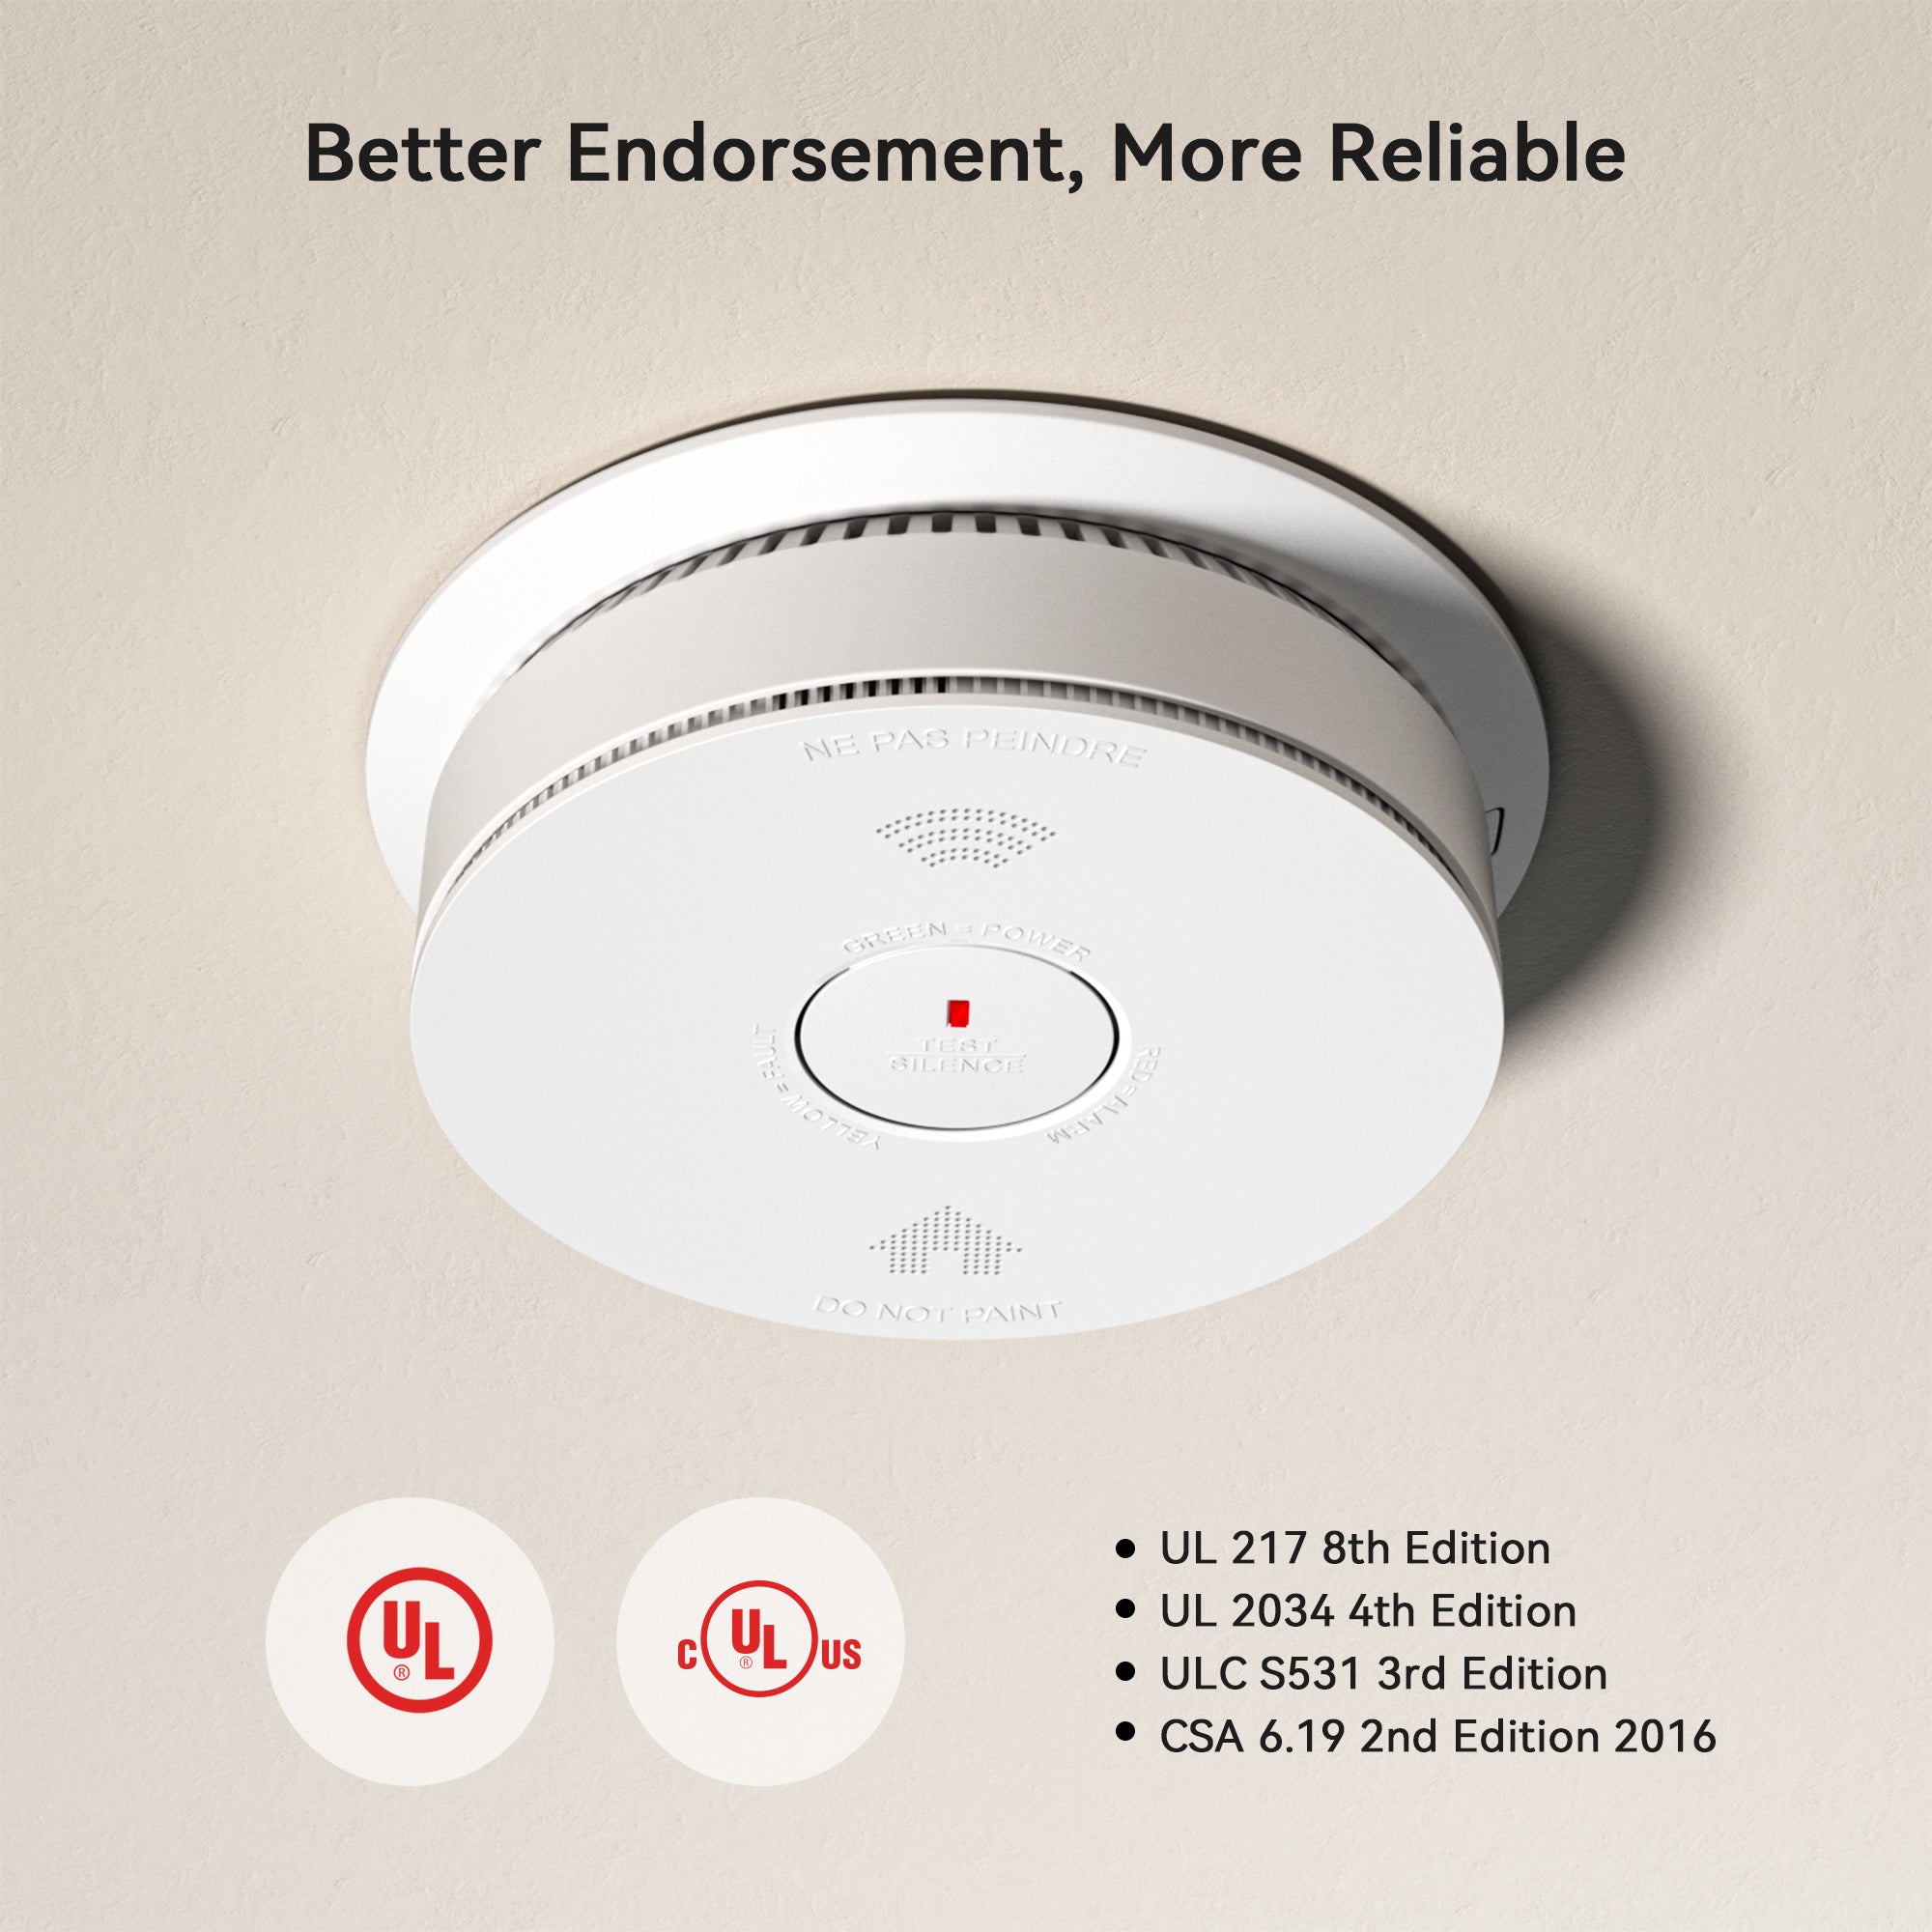 Siterwell GS886F Hardwired Interconnected Combo Smoke & Carbon Monoxide Alarm